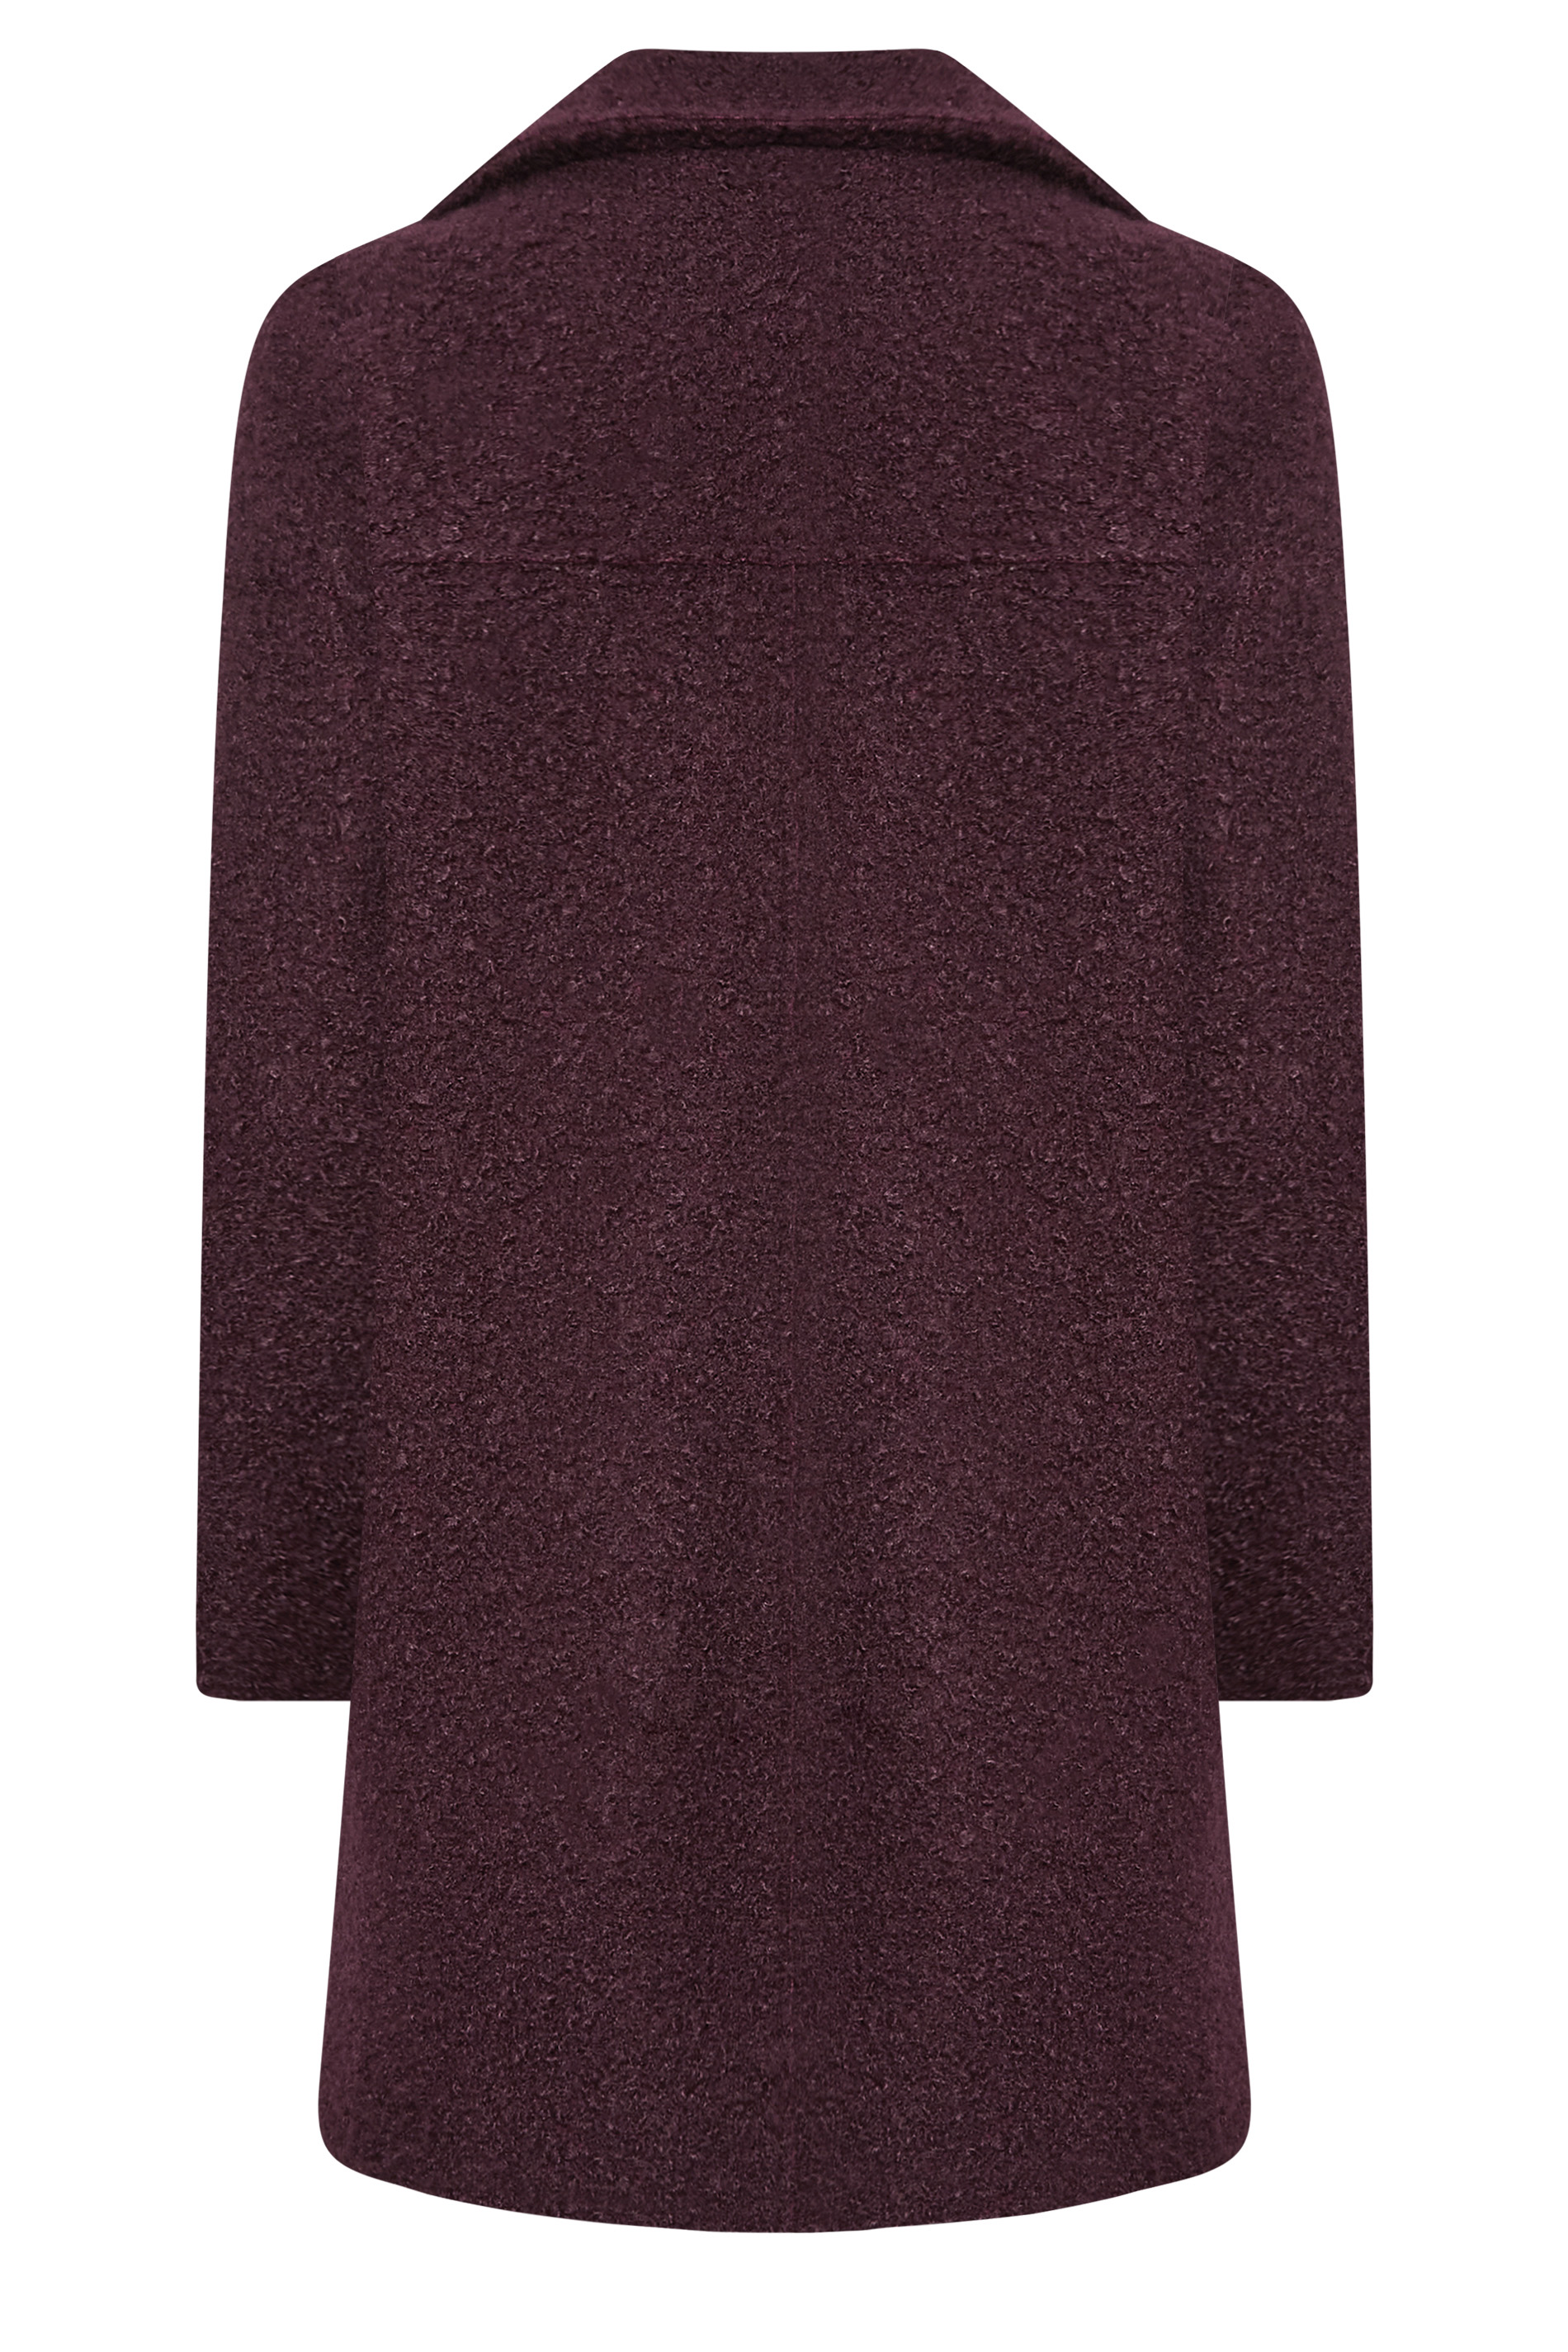 YOURS PETITE Curve Berry Red Boucle Formal Coat | Yours Clothing 2